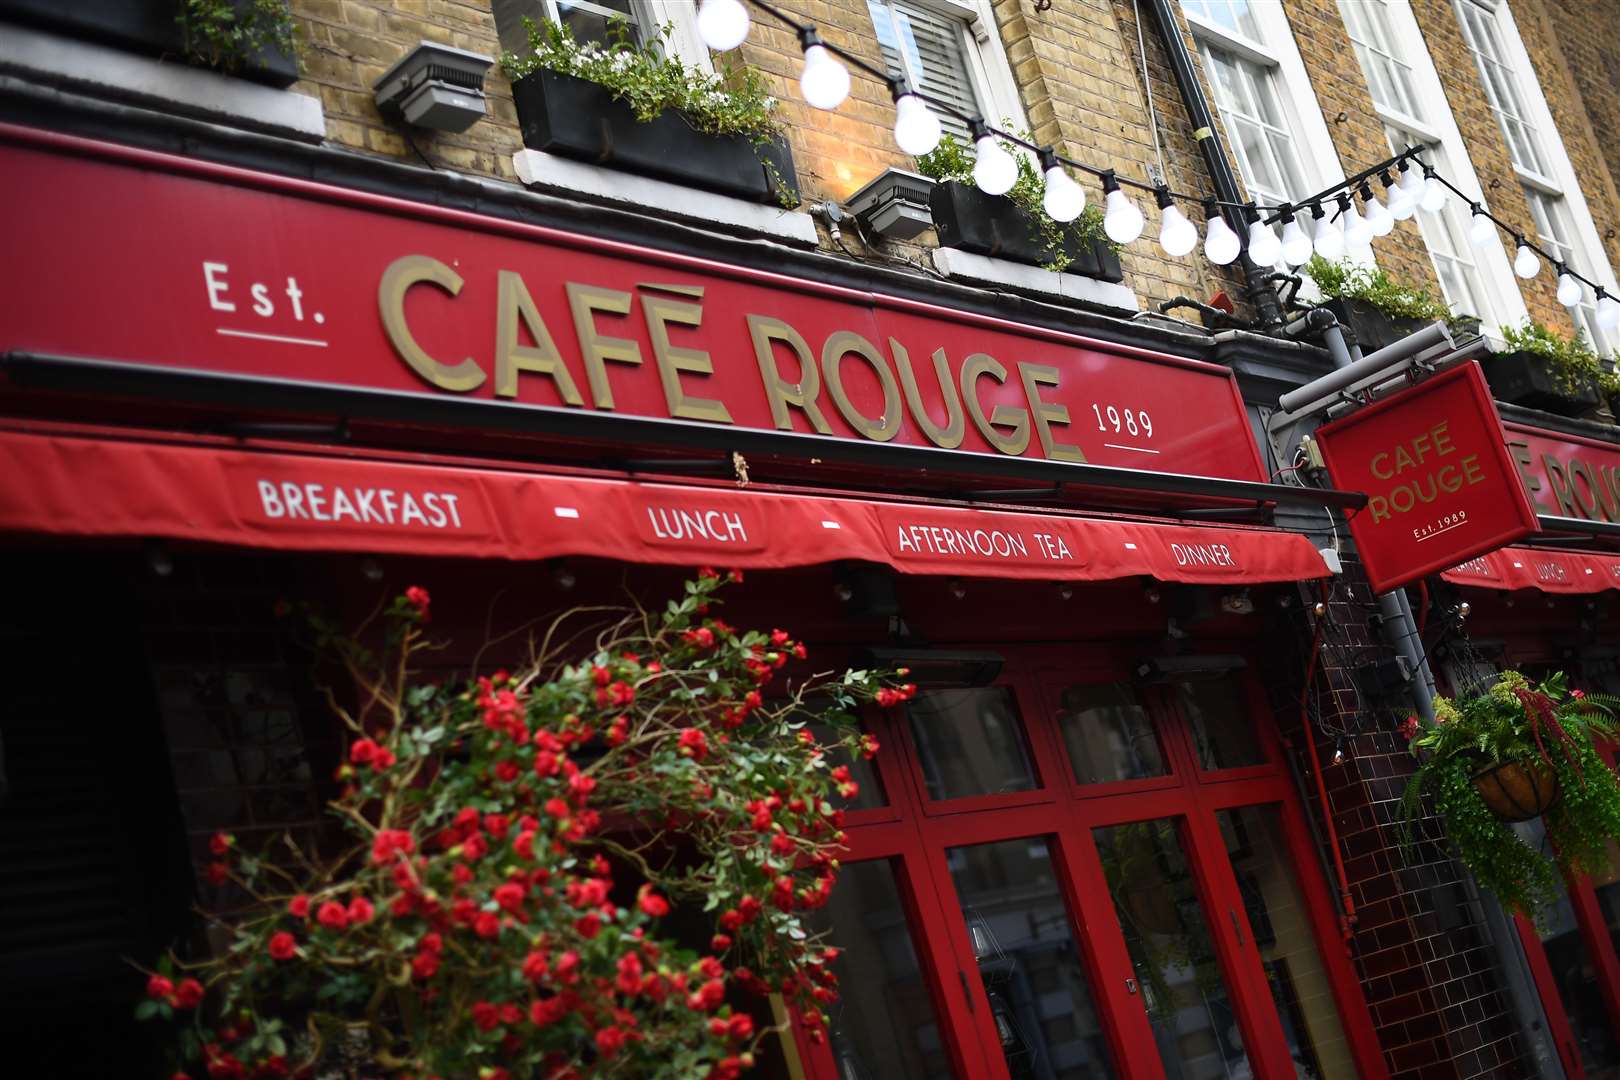 Big Table Group owns chains including Cafe Rouge and Las Iguanas (Victoria Jones/PA)